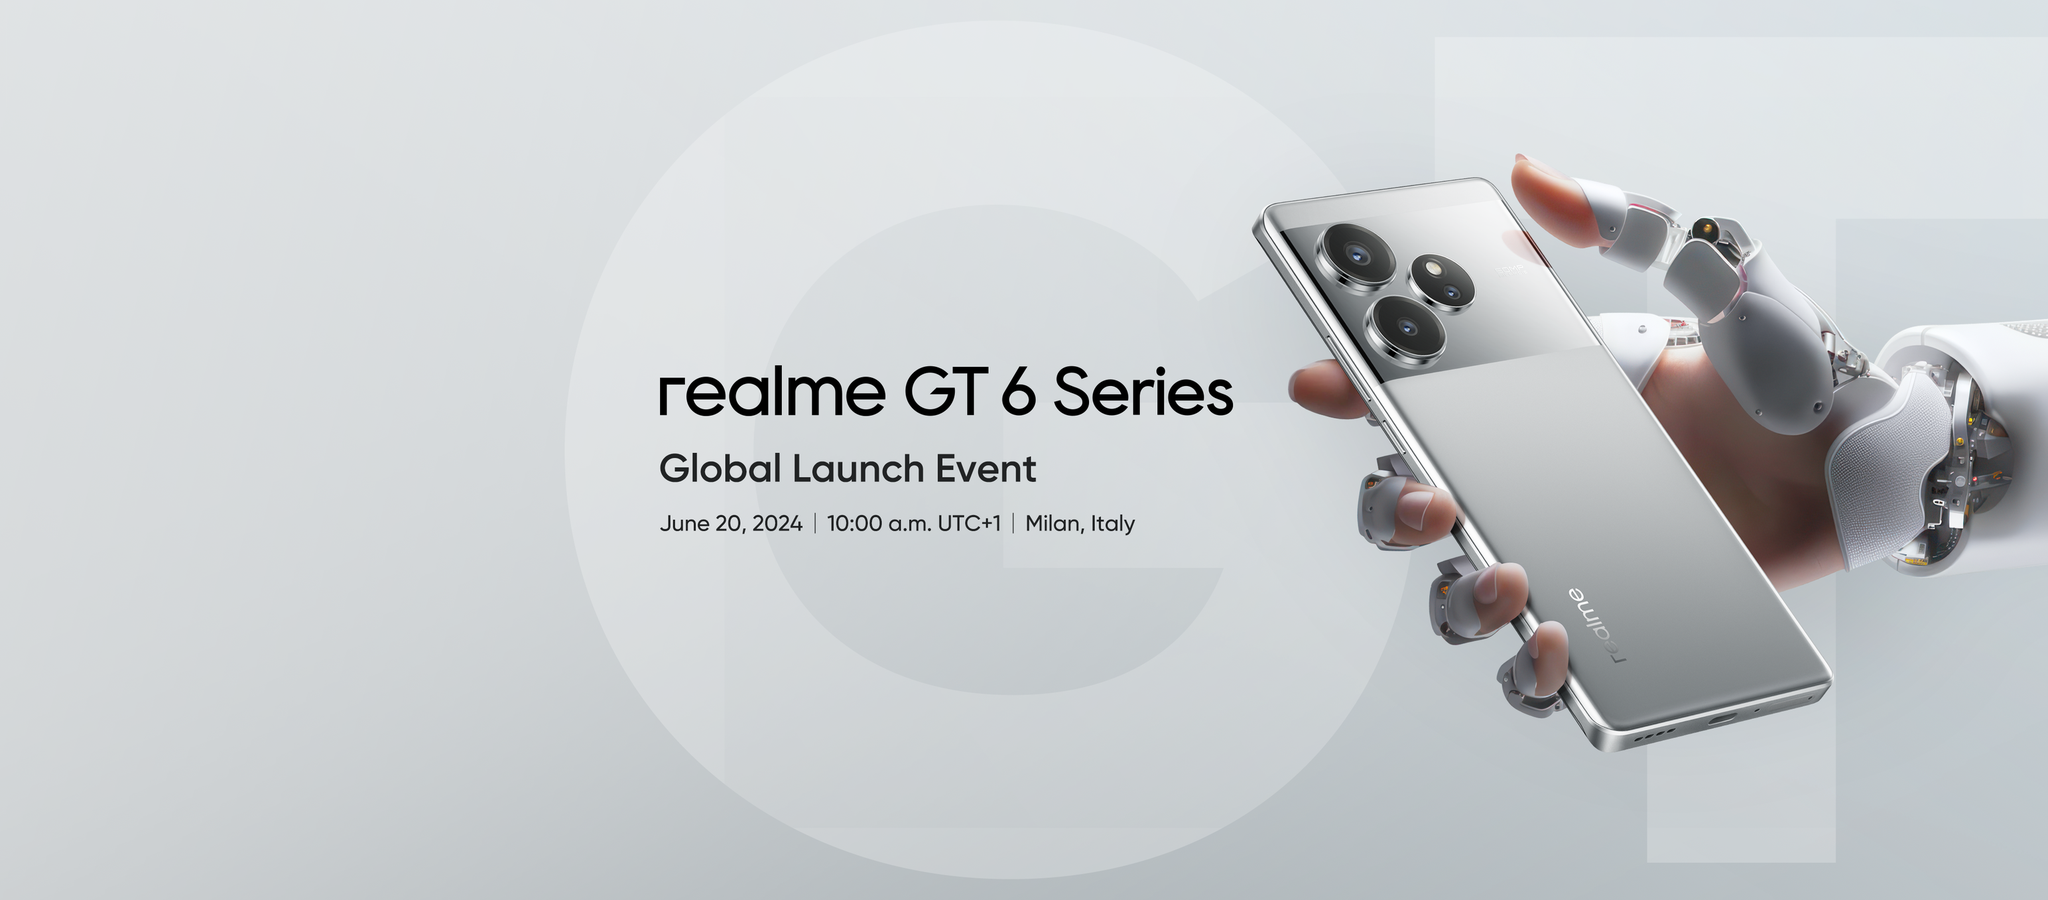 Pre-order the Realme GT 6 for just RM6, get free gifts worth up to RM1,096